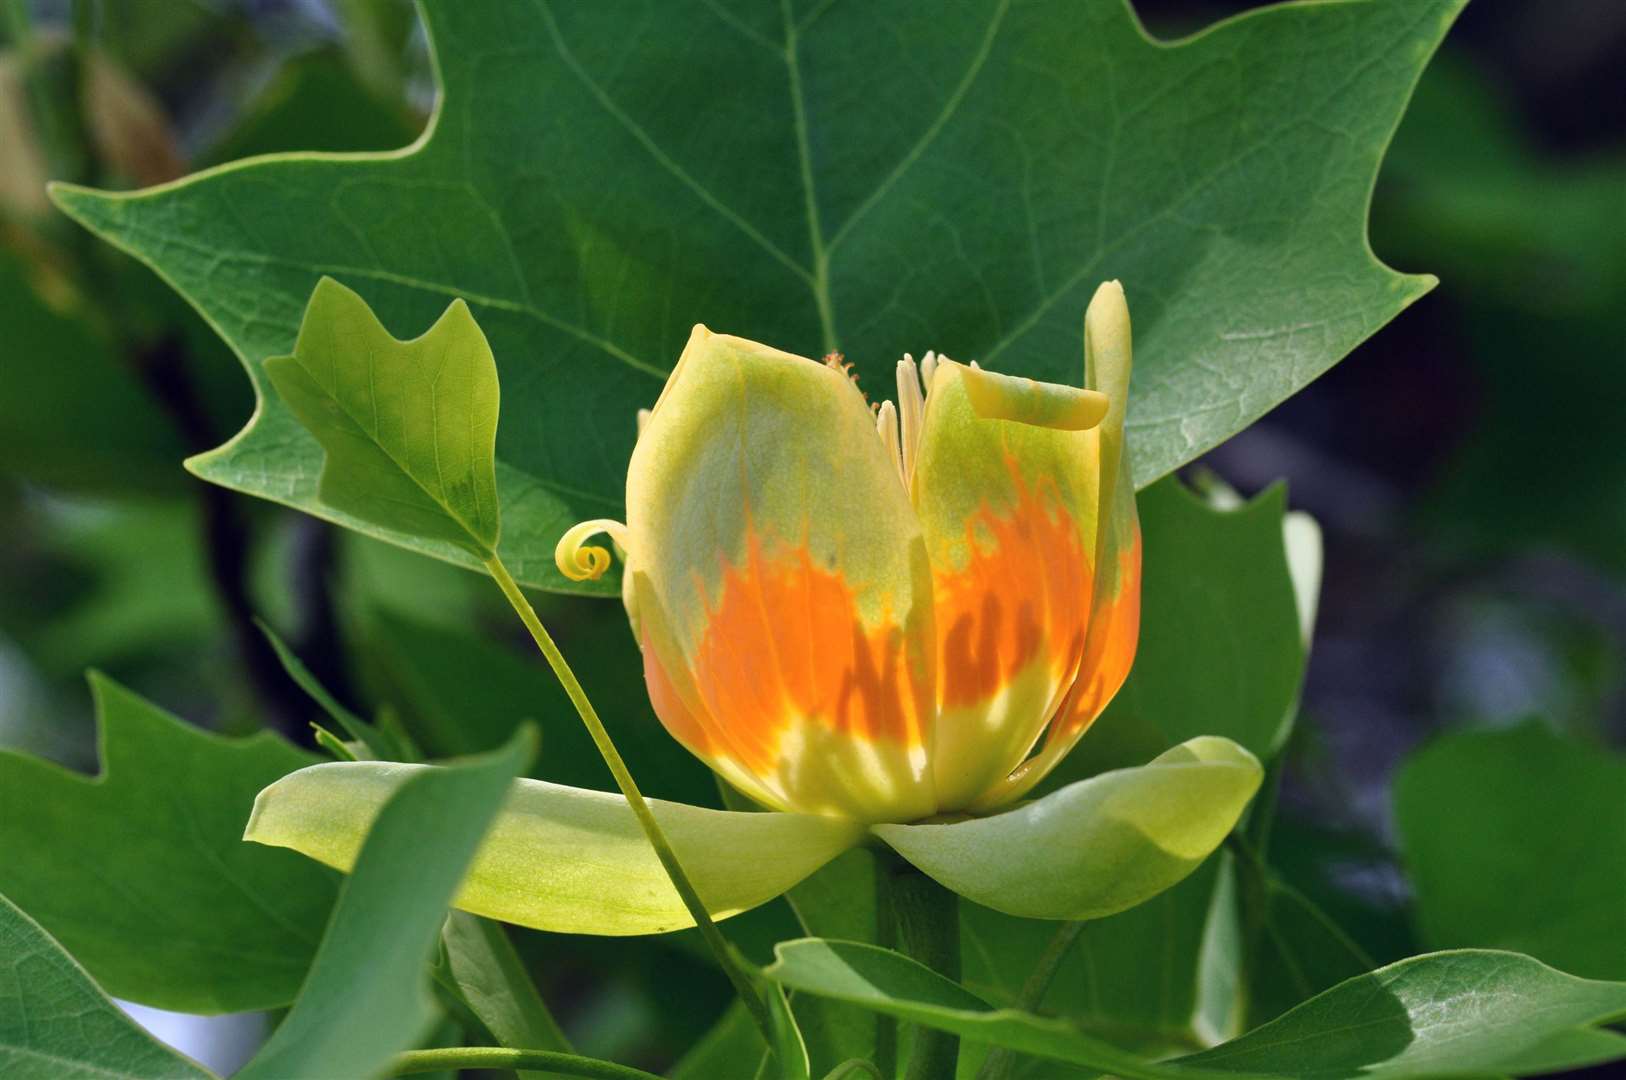 The flower of the tulip tree. Picture: iStock/PA